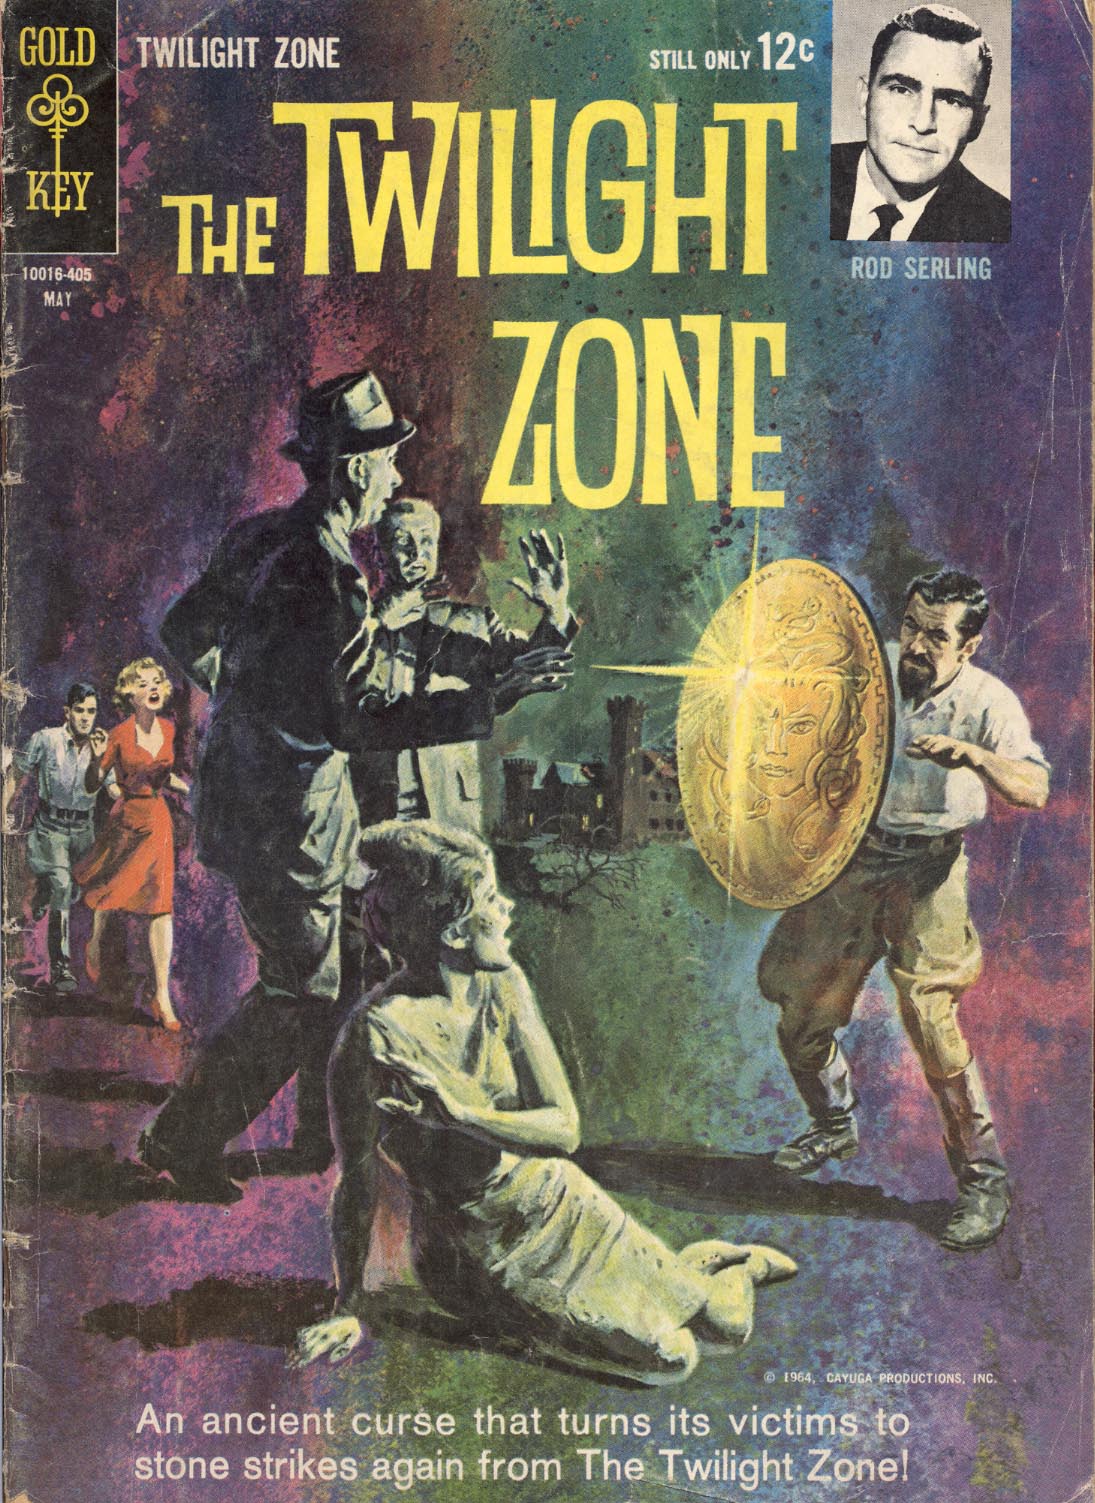 The Twilight Zone 07 | Read The Twilight Zone 07 comic online in high  quality. Read Full Comic online for free - Read comics online in high  quality .|